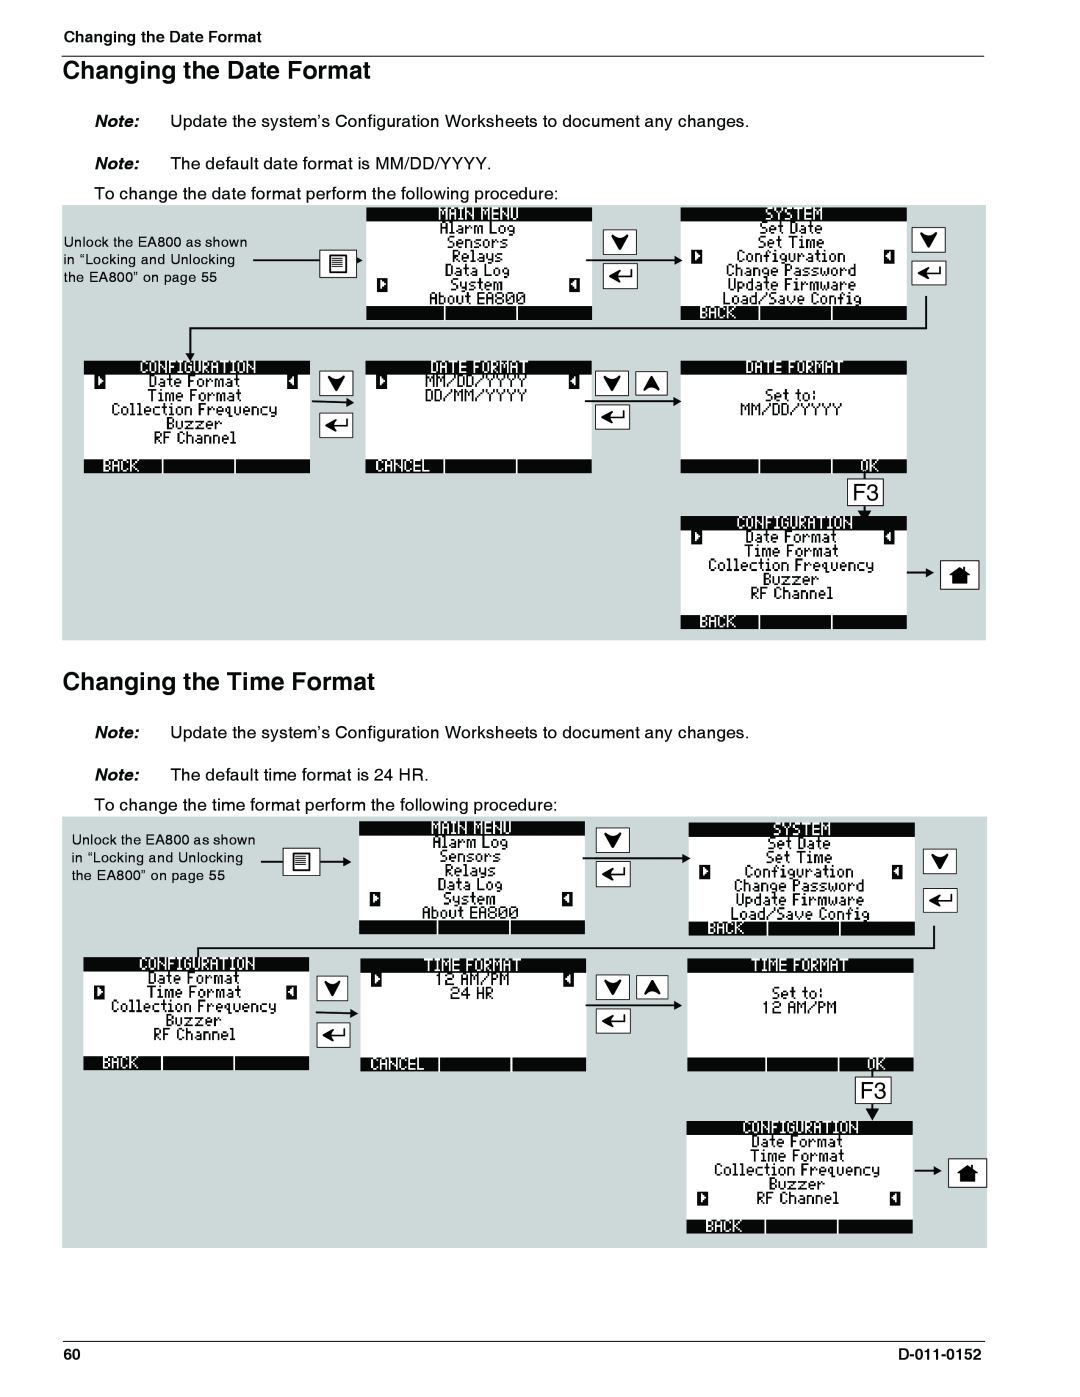 Enviro EA800 owner manual Changing the Date Format, Changing the Time Format 